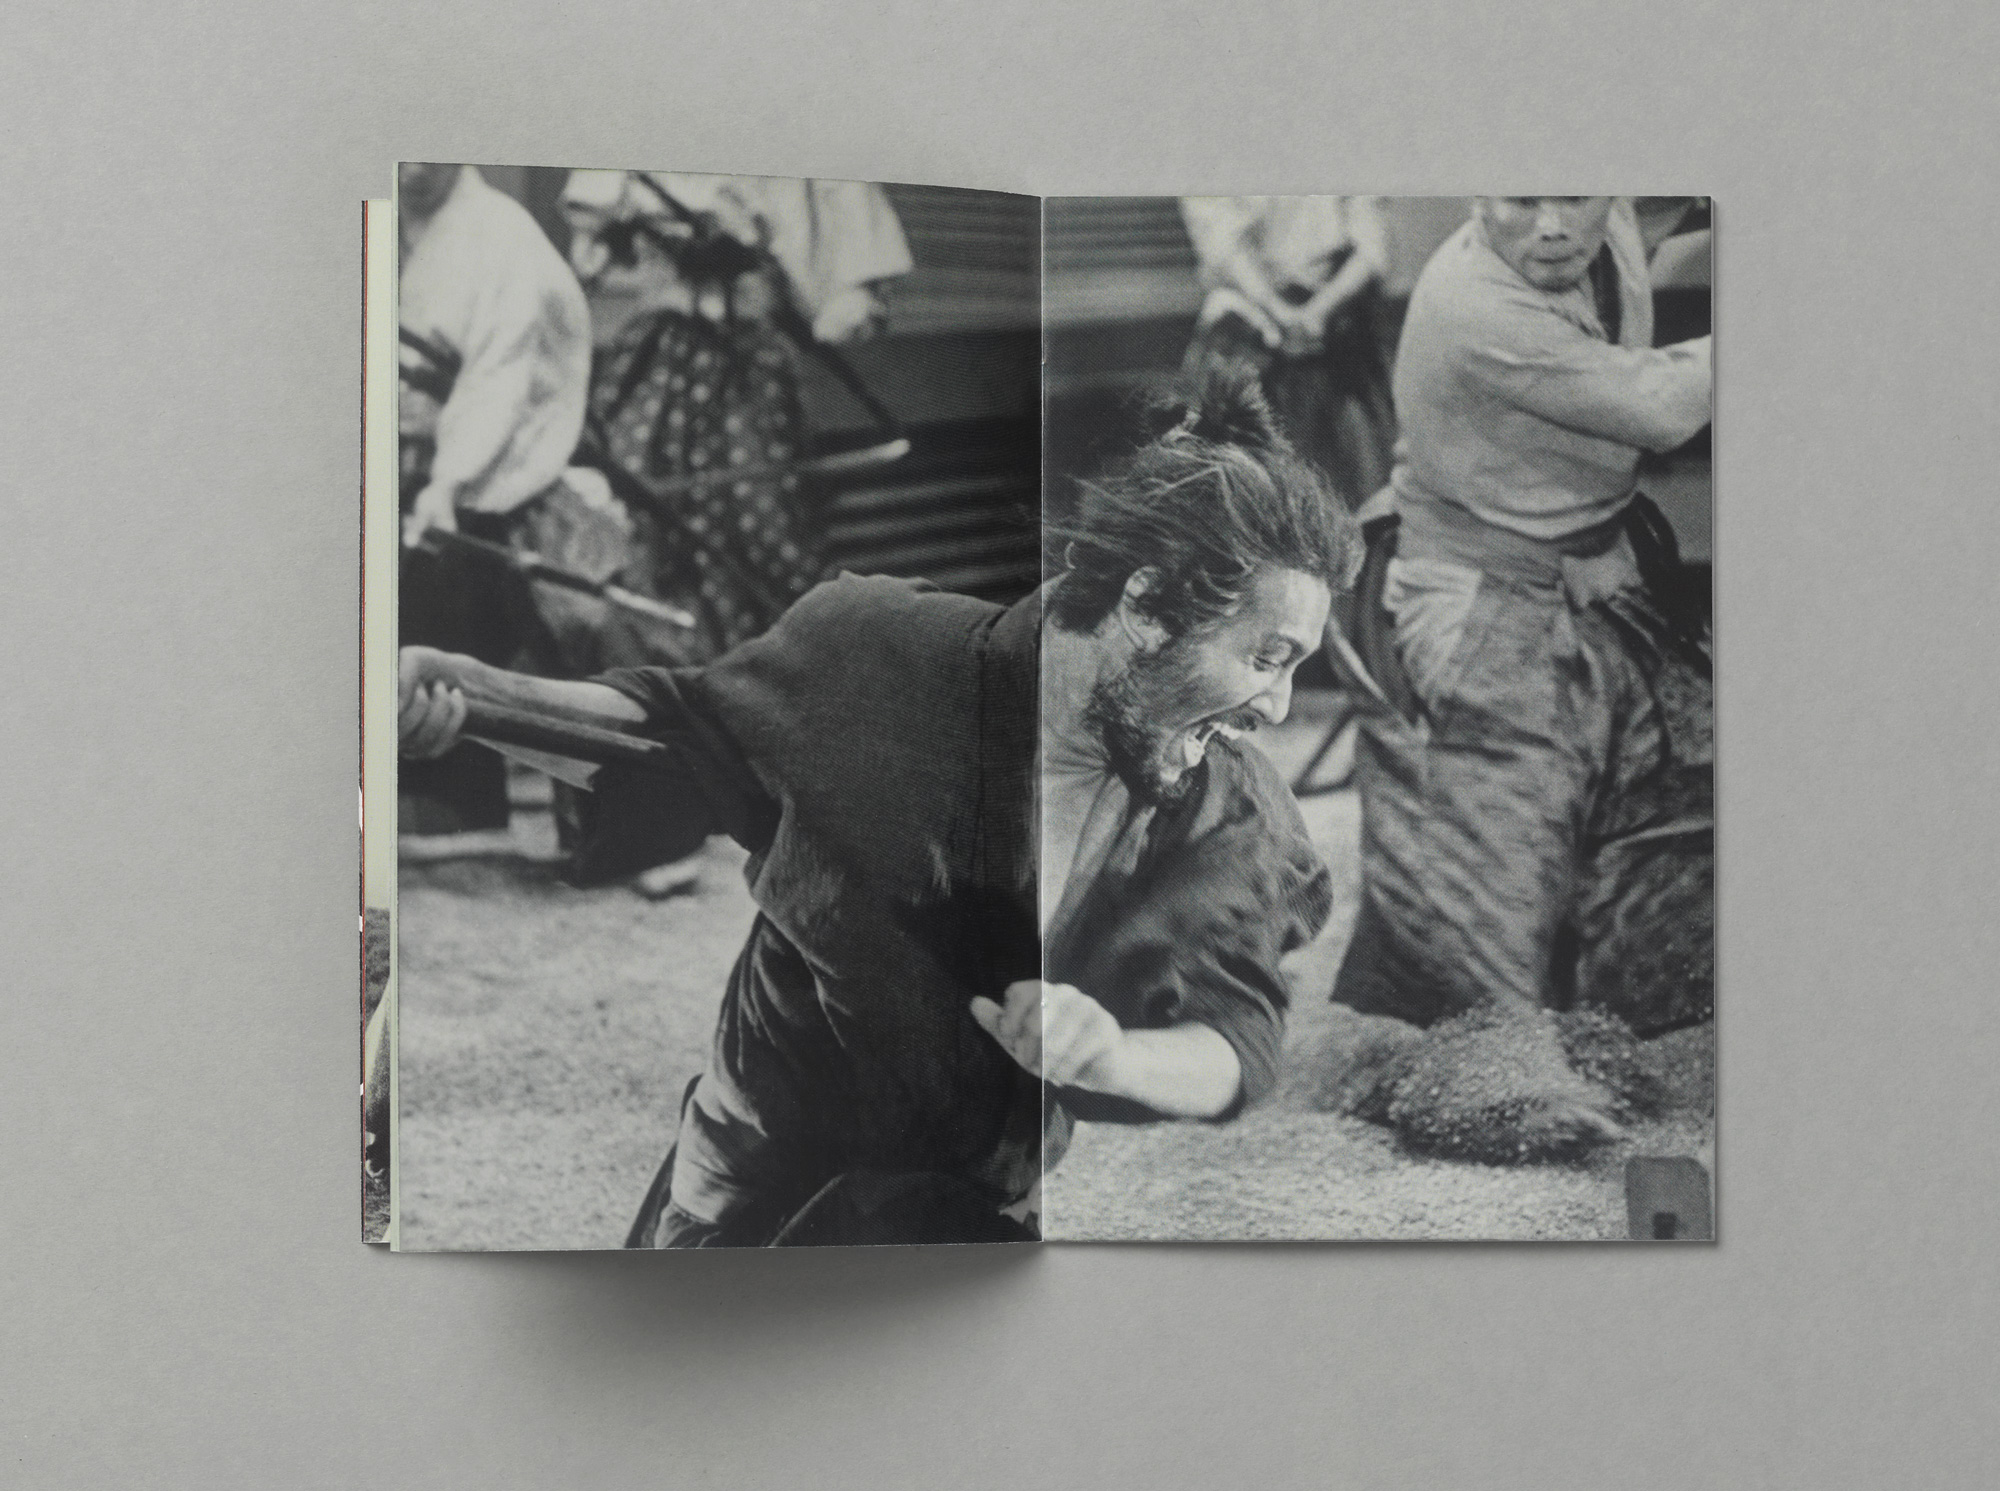 Bossard Wettstein Project - Criterion Collection - Booklet